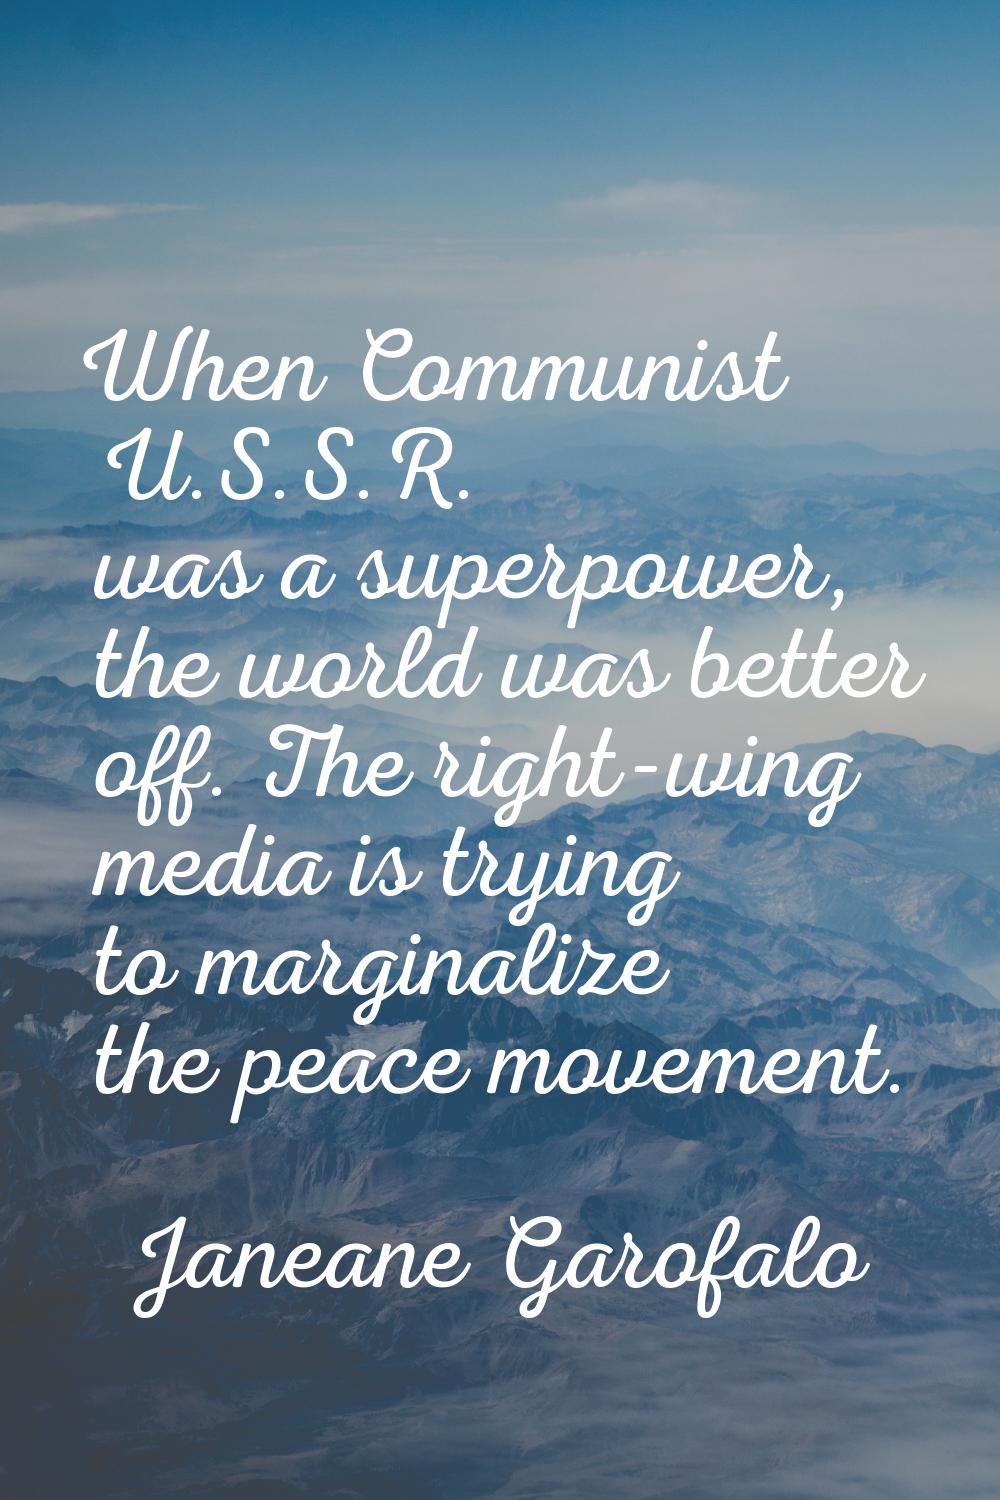 When Communist U.S.S.R. was a superpower, the world was better off. The right-wing media is trying 